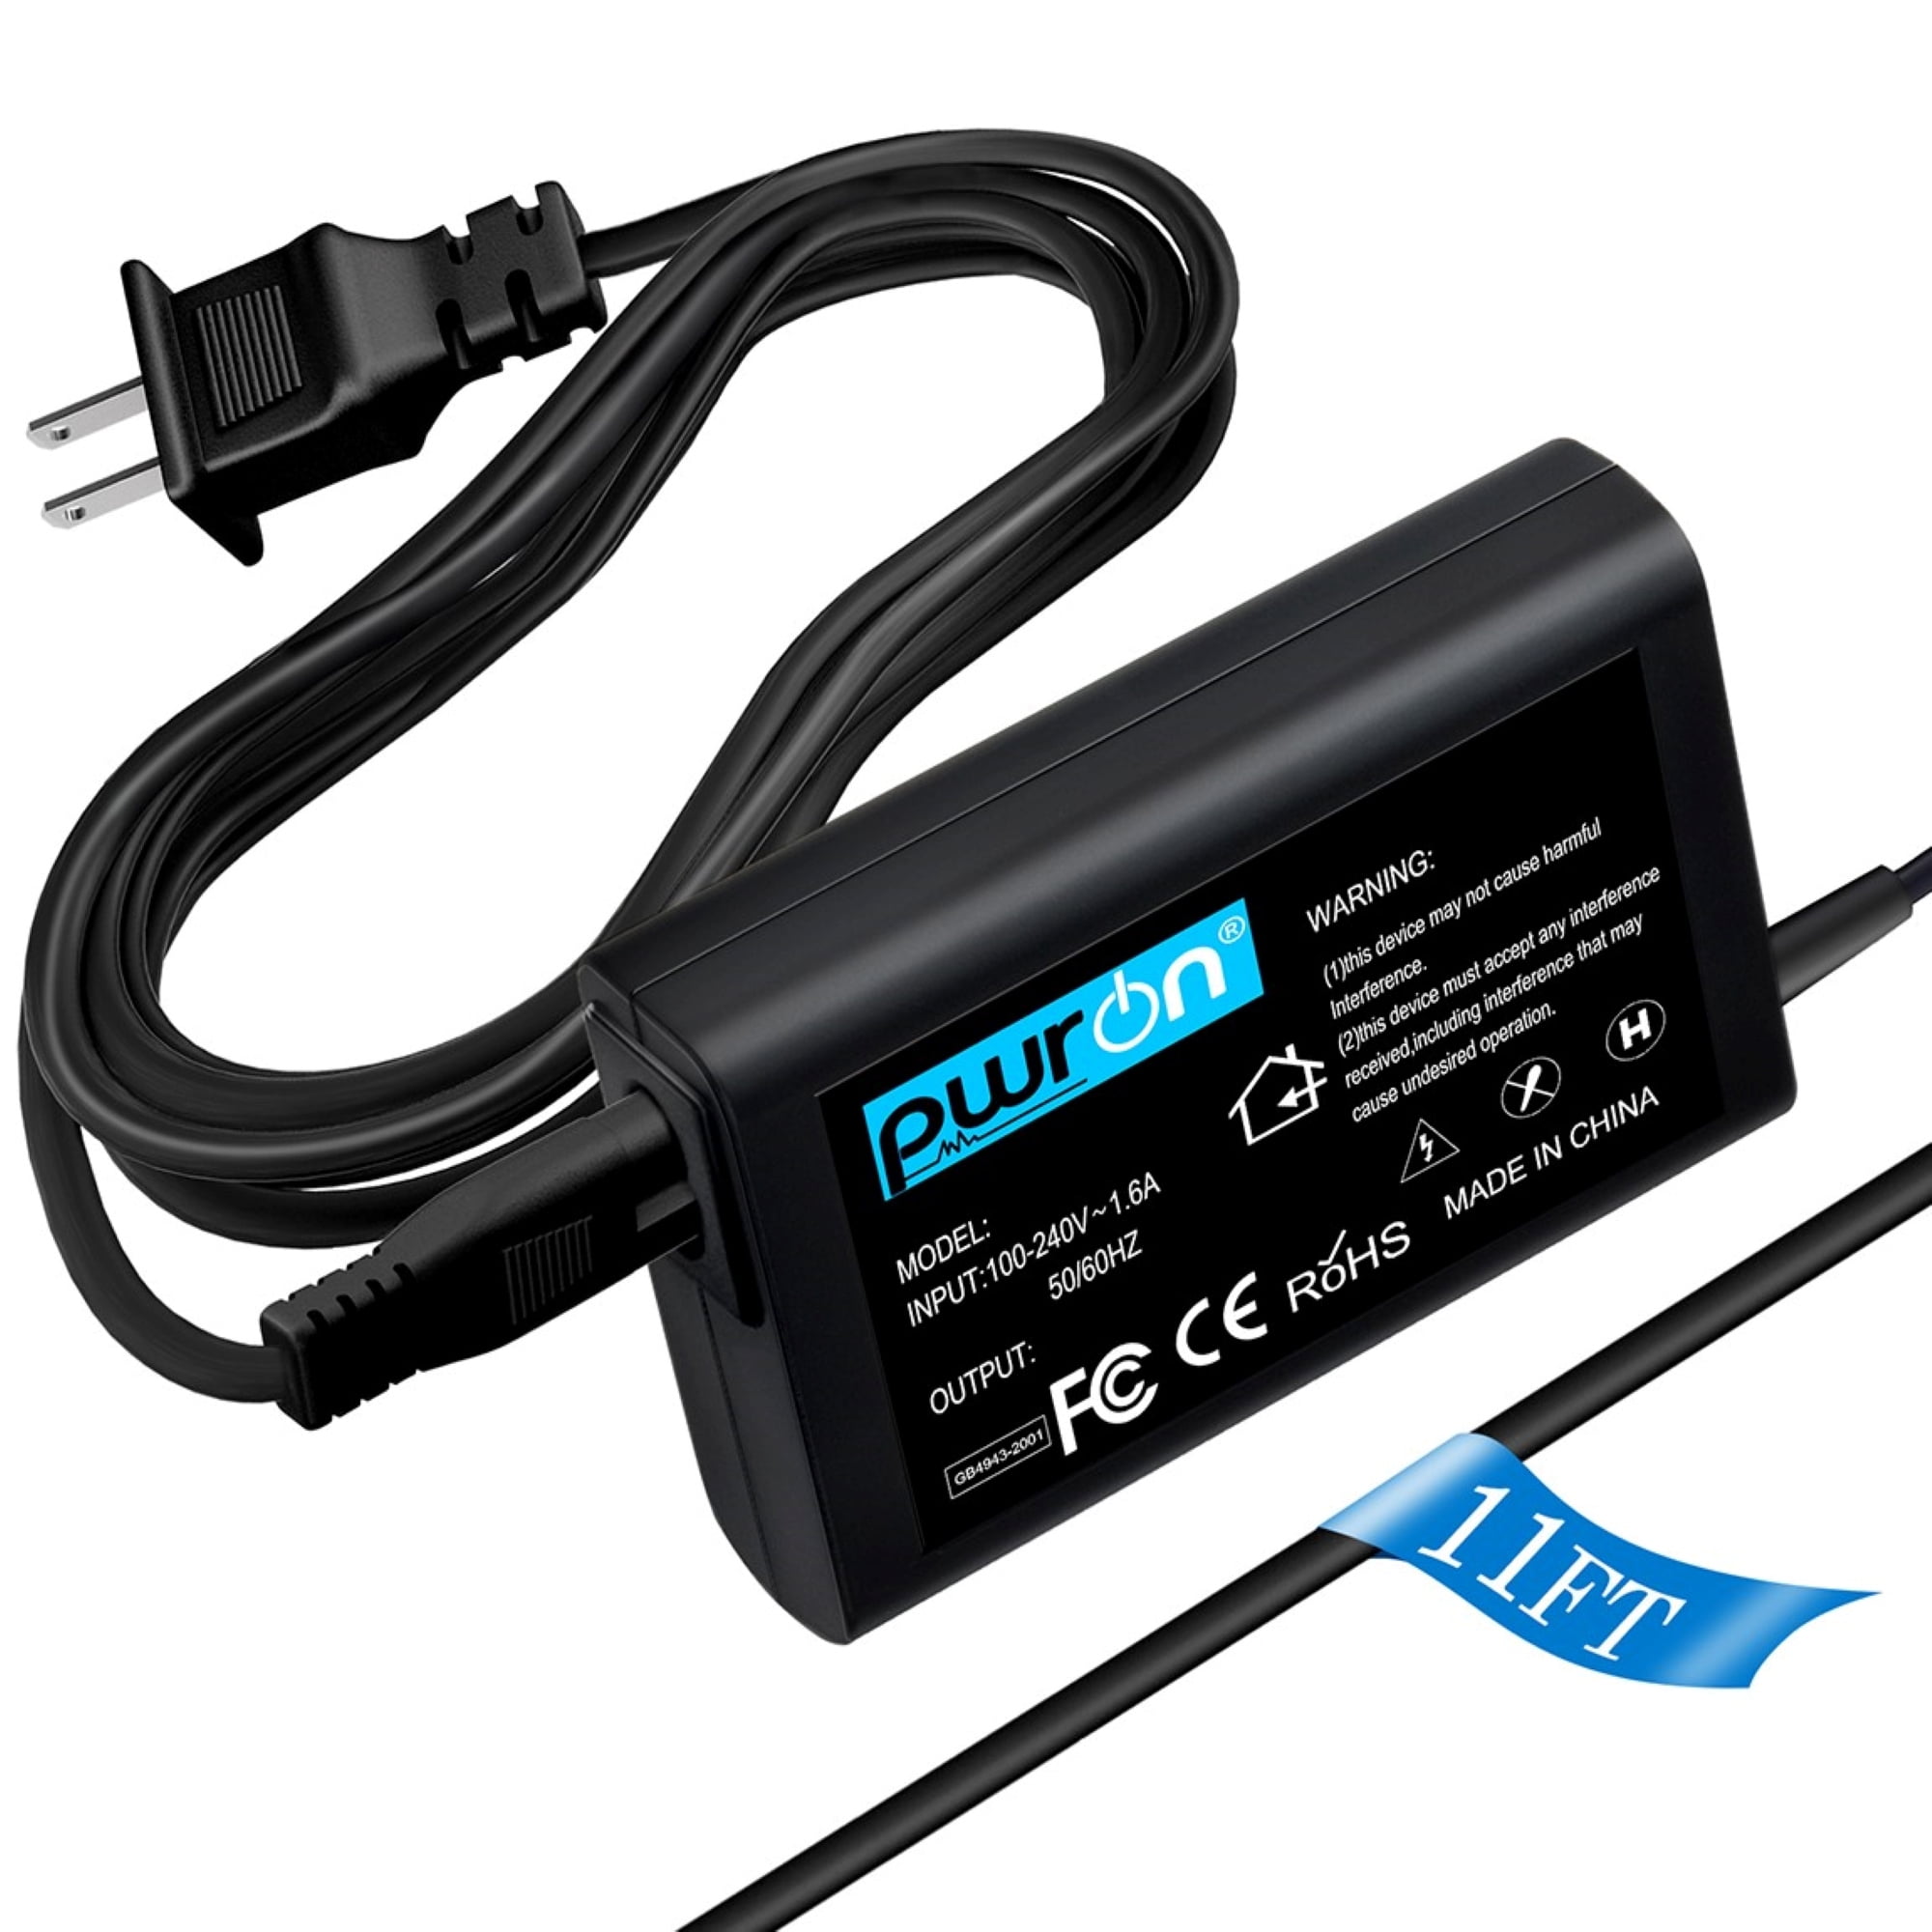 AC ADAPTER POWER CHARGER SUPPLY CORD Meade Universal DS-60EC DS-70EC DS-80EC 